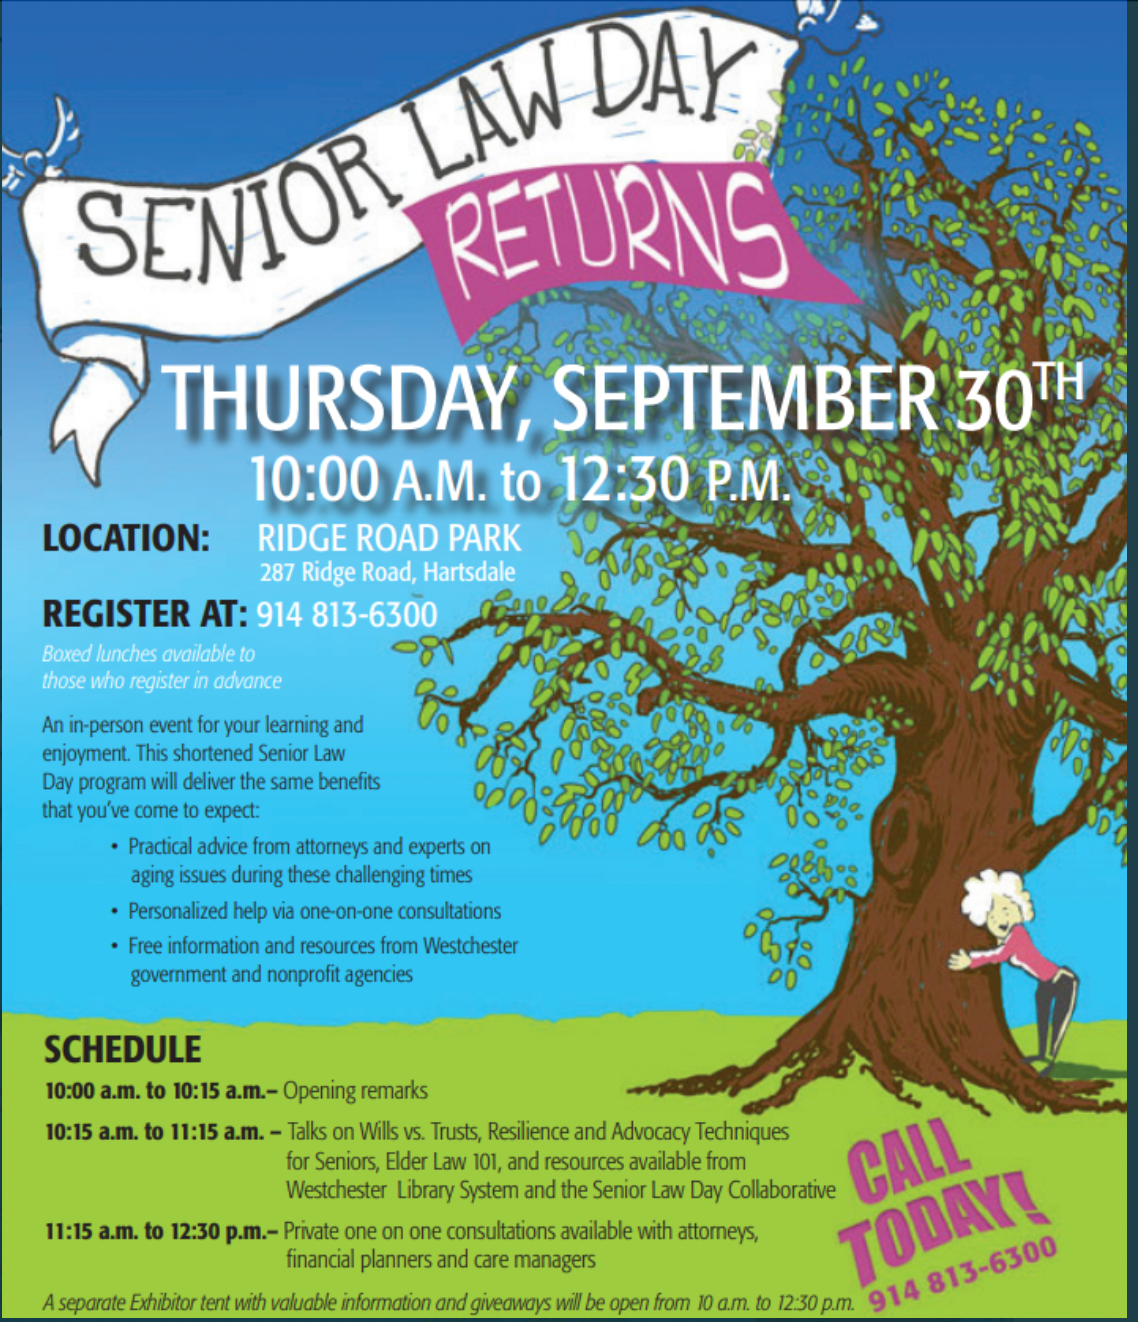 SENIOR LAW DAY RETURNS TO WESTCHESTER COUNTY SEPTEMBER 30